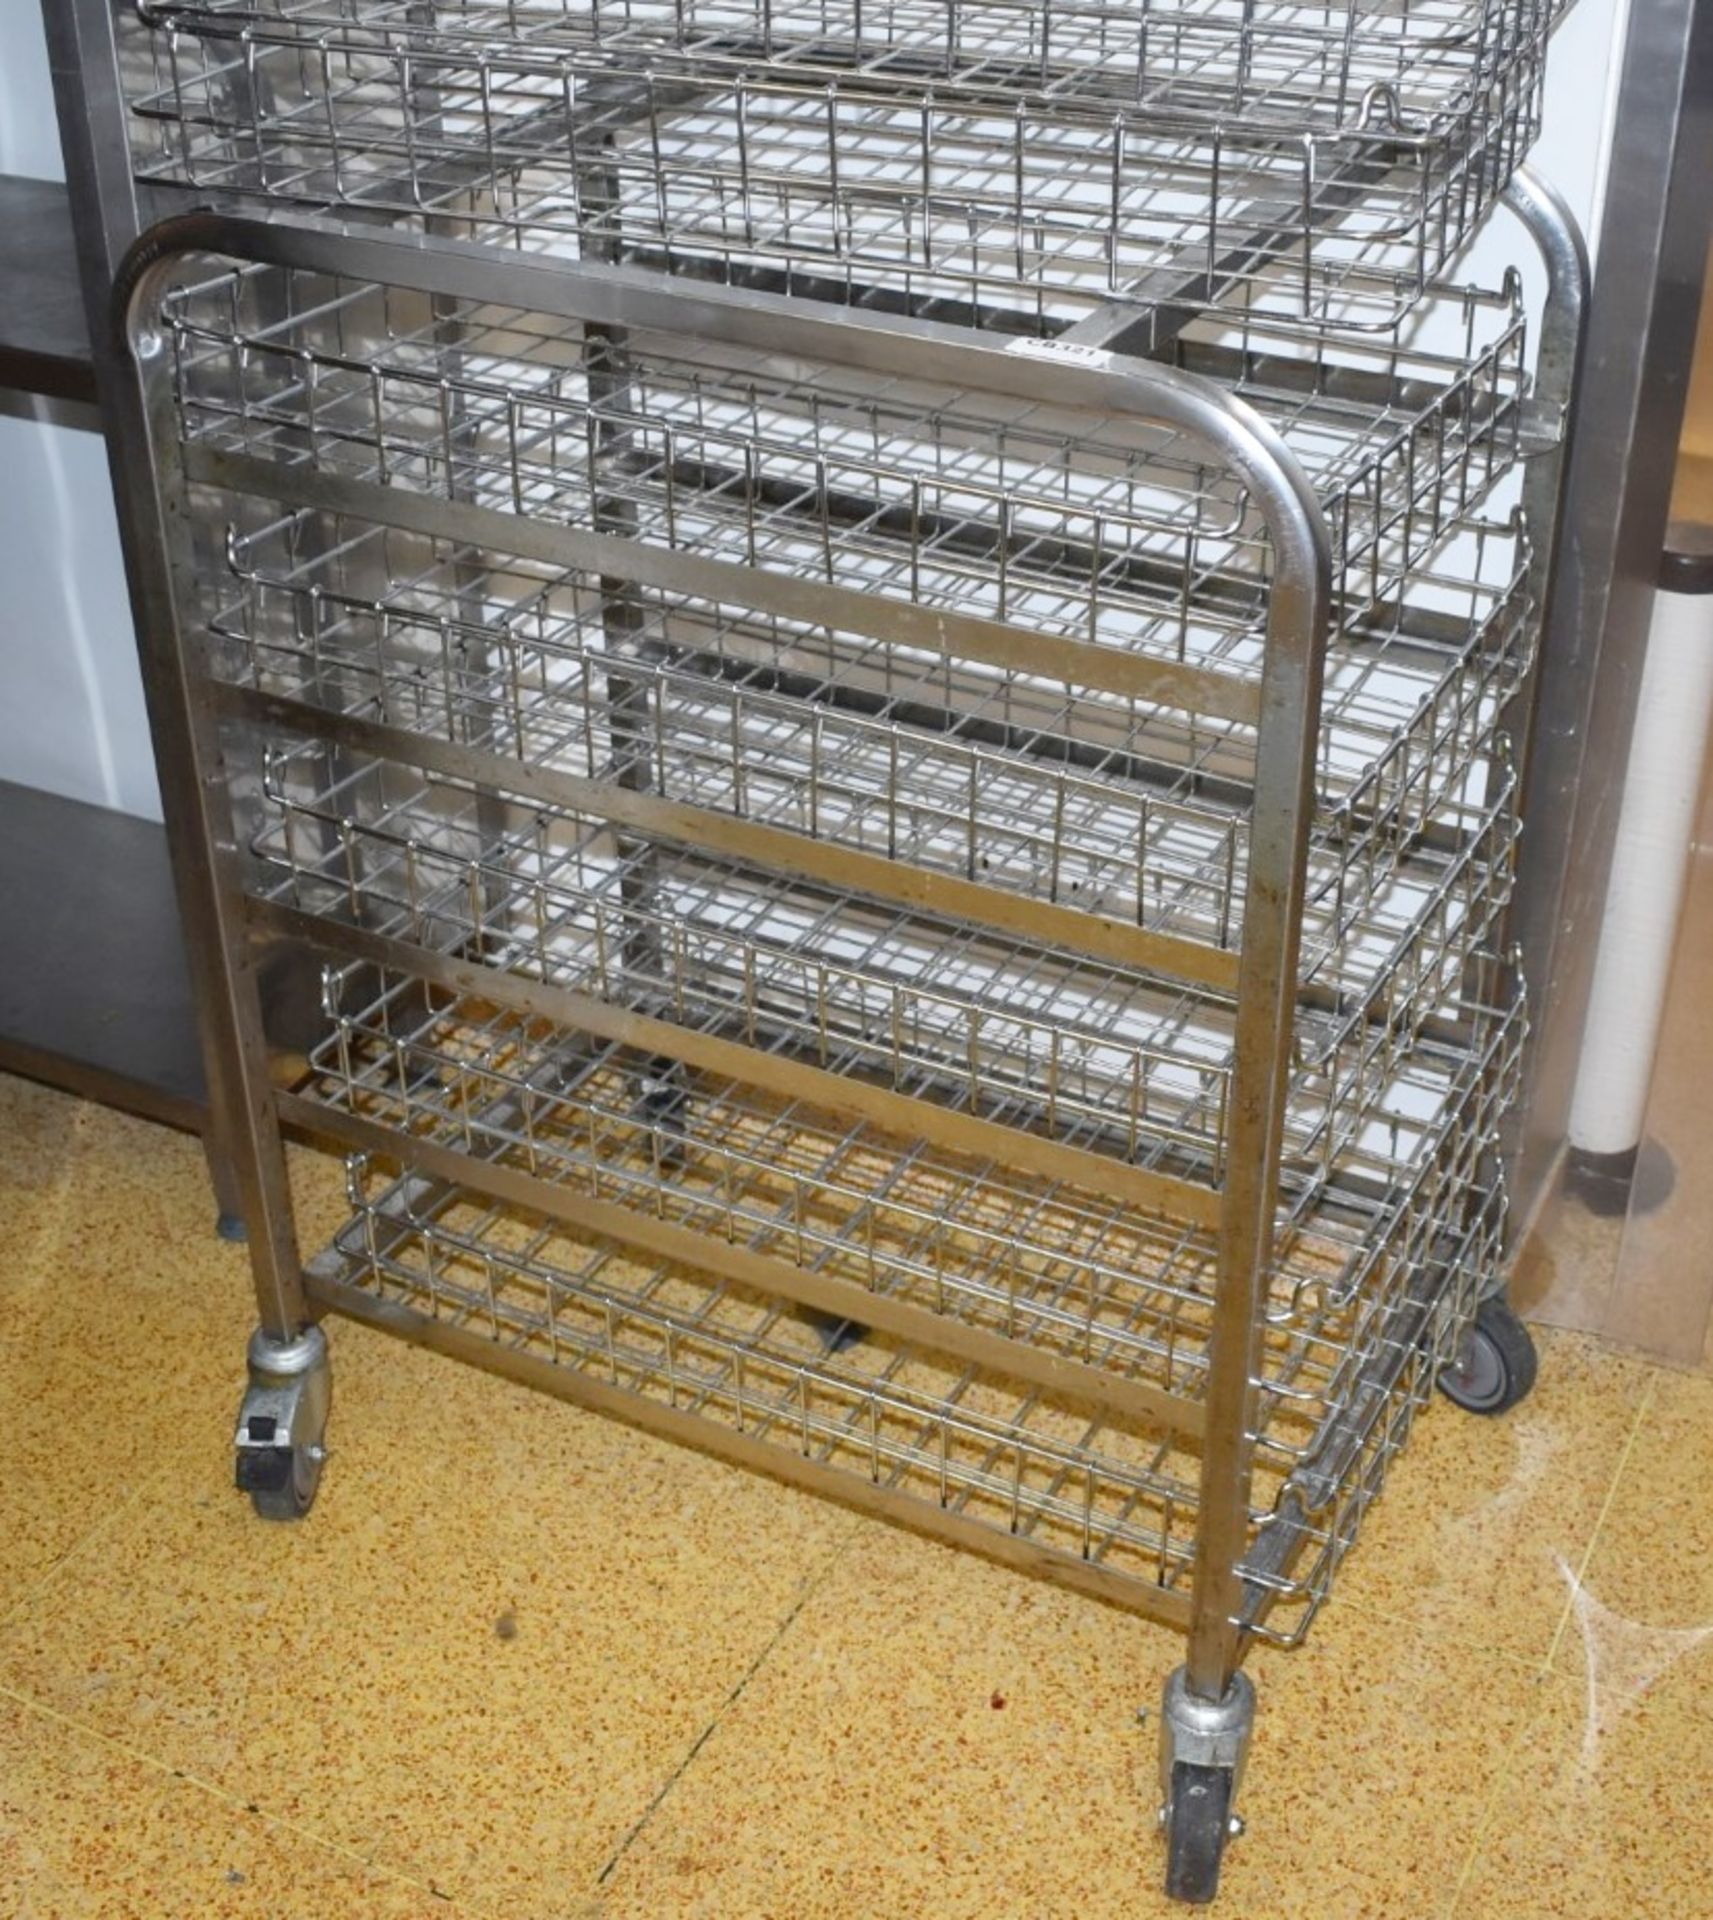 1 x Stainless Steel Basket Trolley With Lockable Castor Wheels and Five Chrome Wire Baskets - H100 x